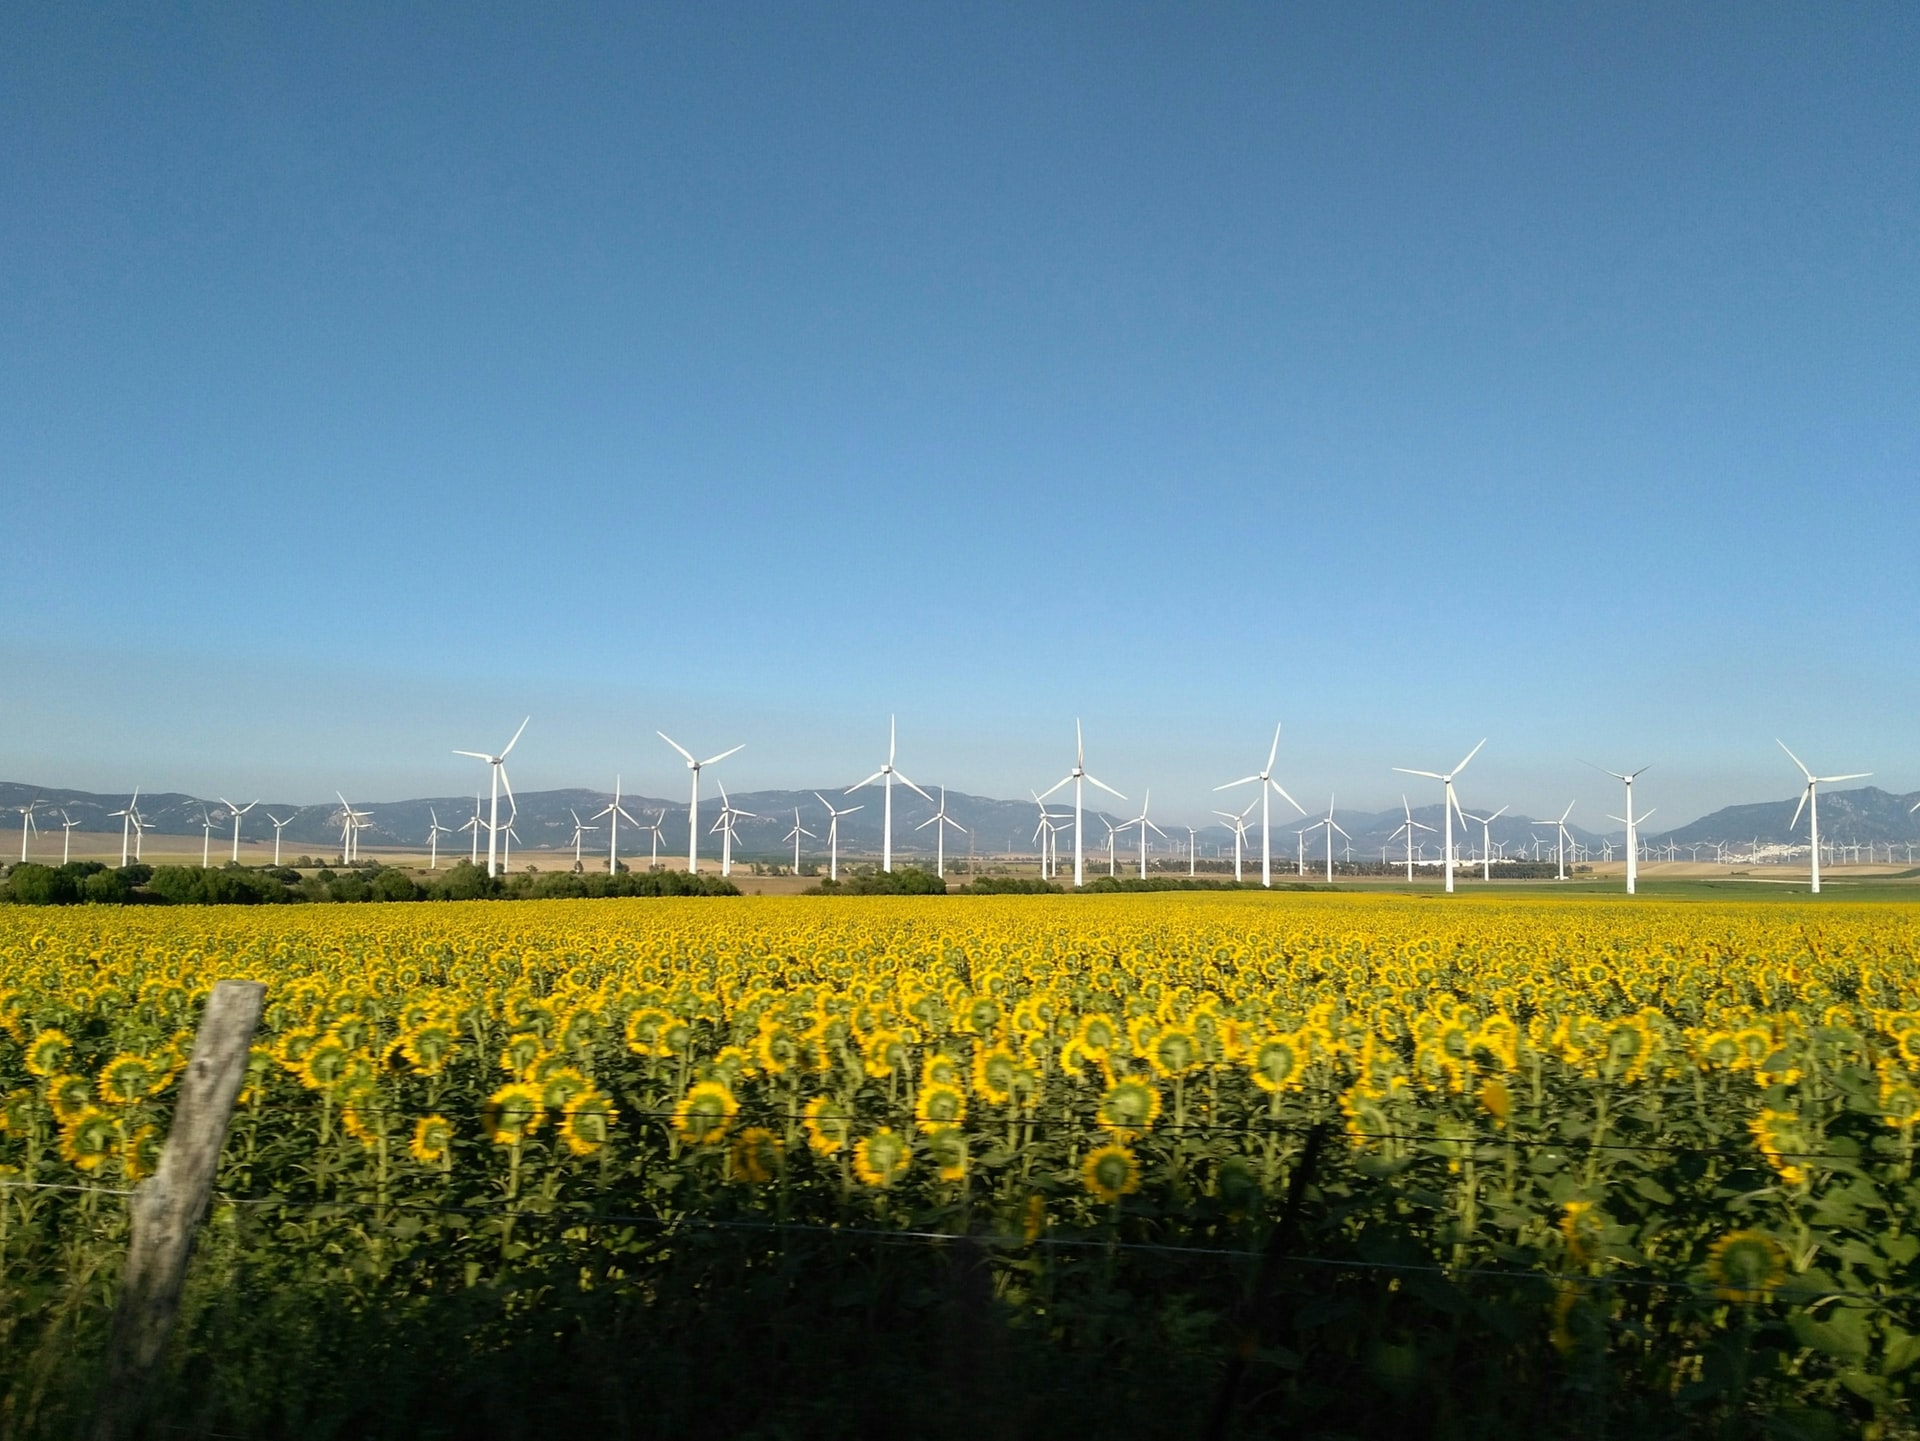 Spain now plans to become the 'energy breadbasket' of Europe, aiming to generate 74% of electricity from renewable sources by 2030. Read the full story ?